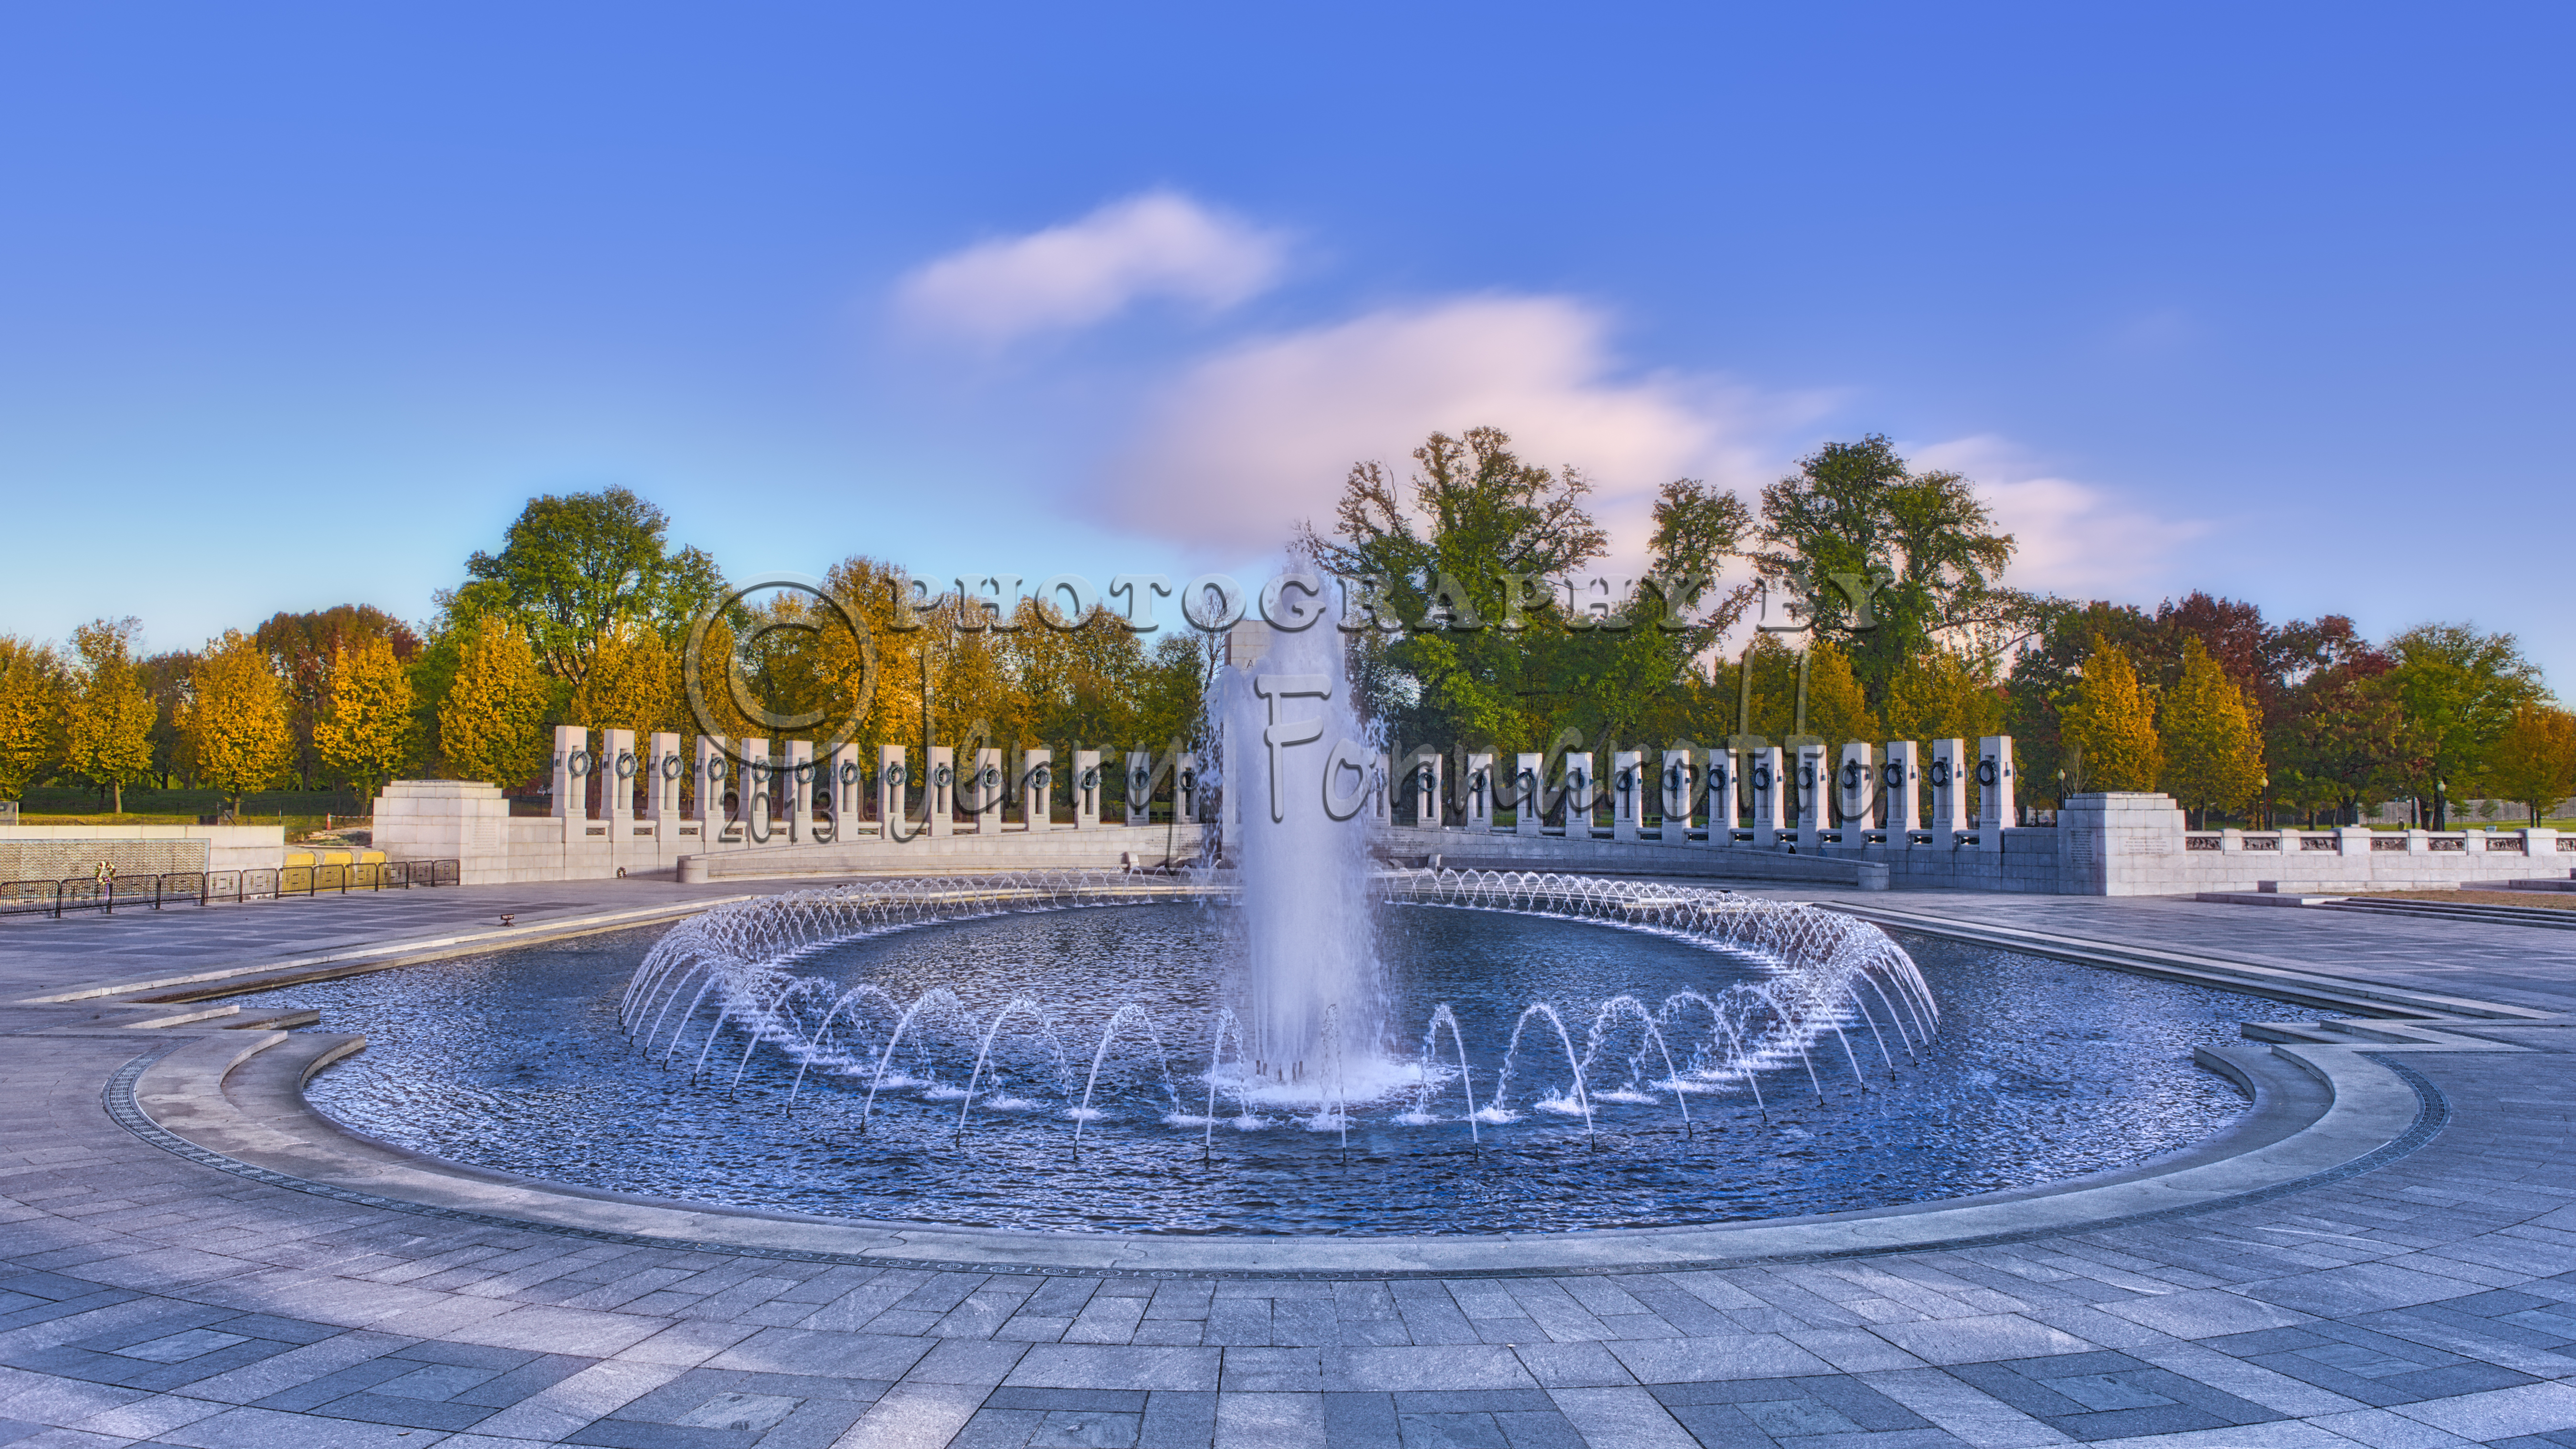 The National World War II Memorial is located on the National Mall in Washington D.C.. It is dedicated to the Americans who served in the armed forces and to civilans during World War II.